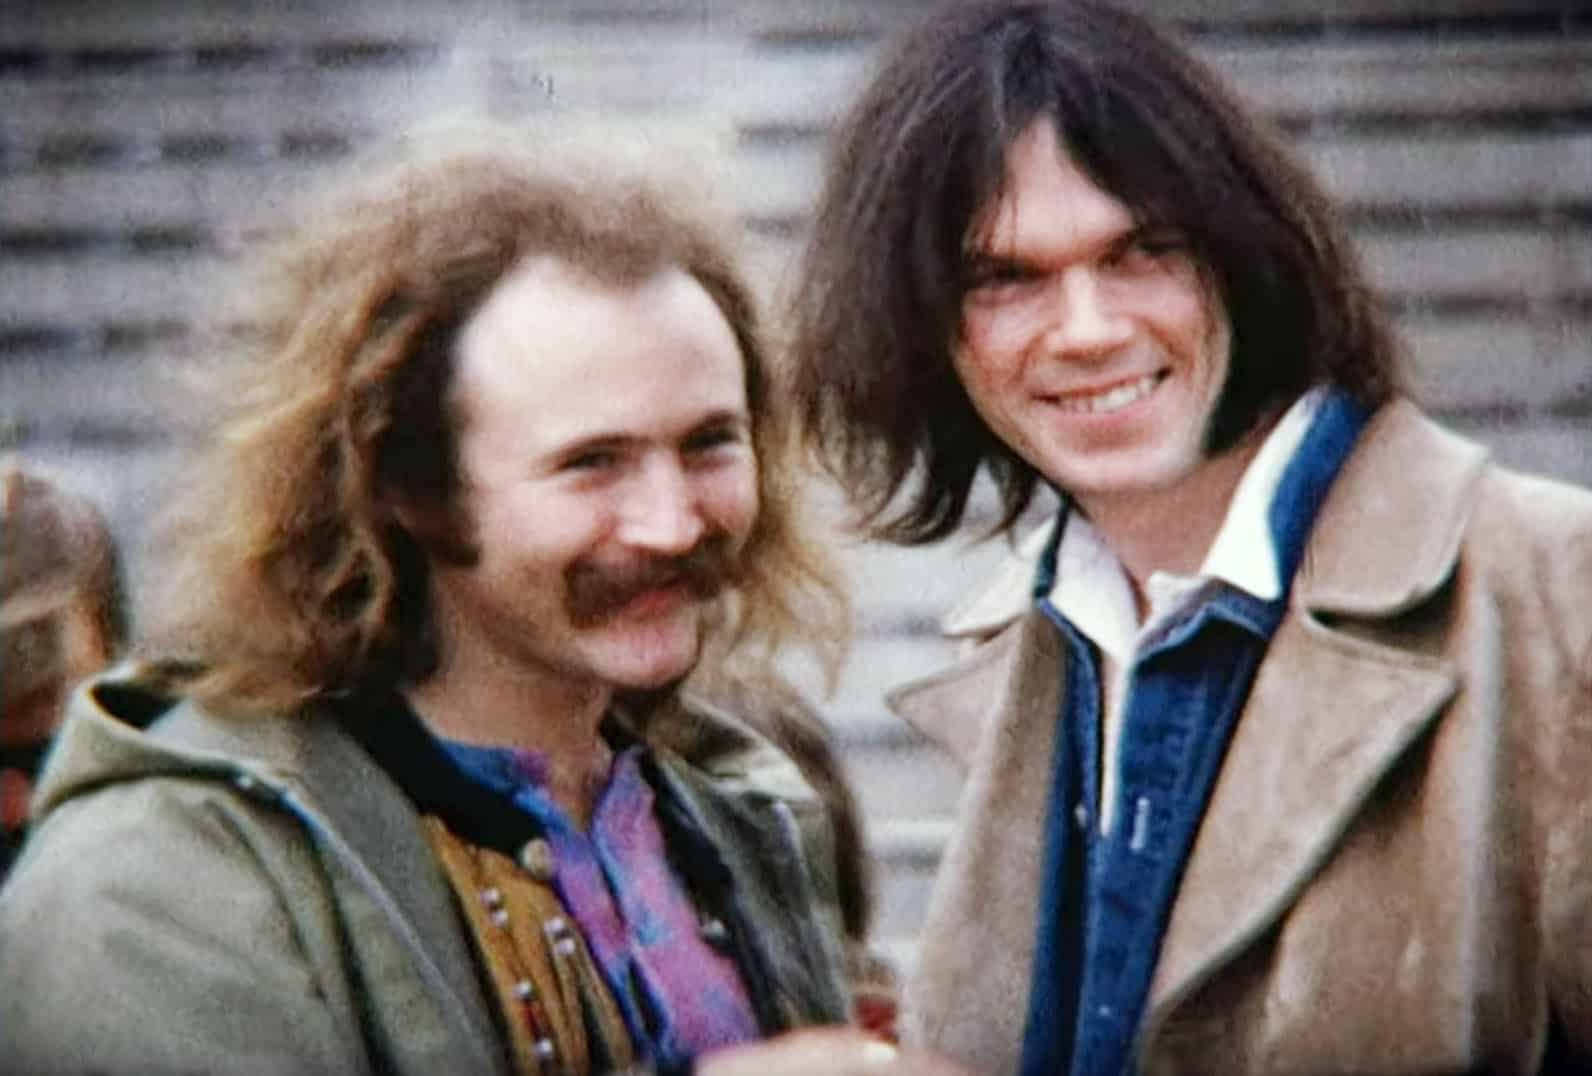 DAVID CROSBY: REMEMBER MY NAME, from left: David Crosby, Neil Young, late 1960s-early 1970s, 2019